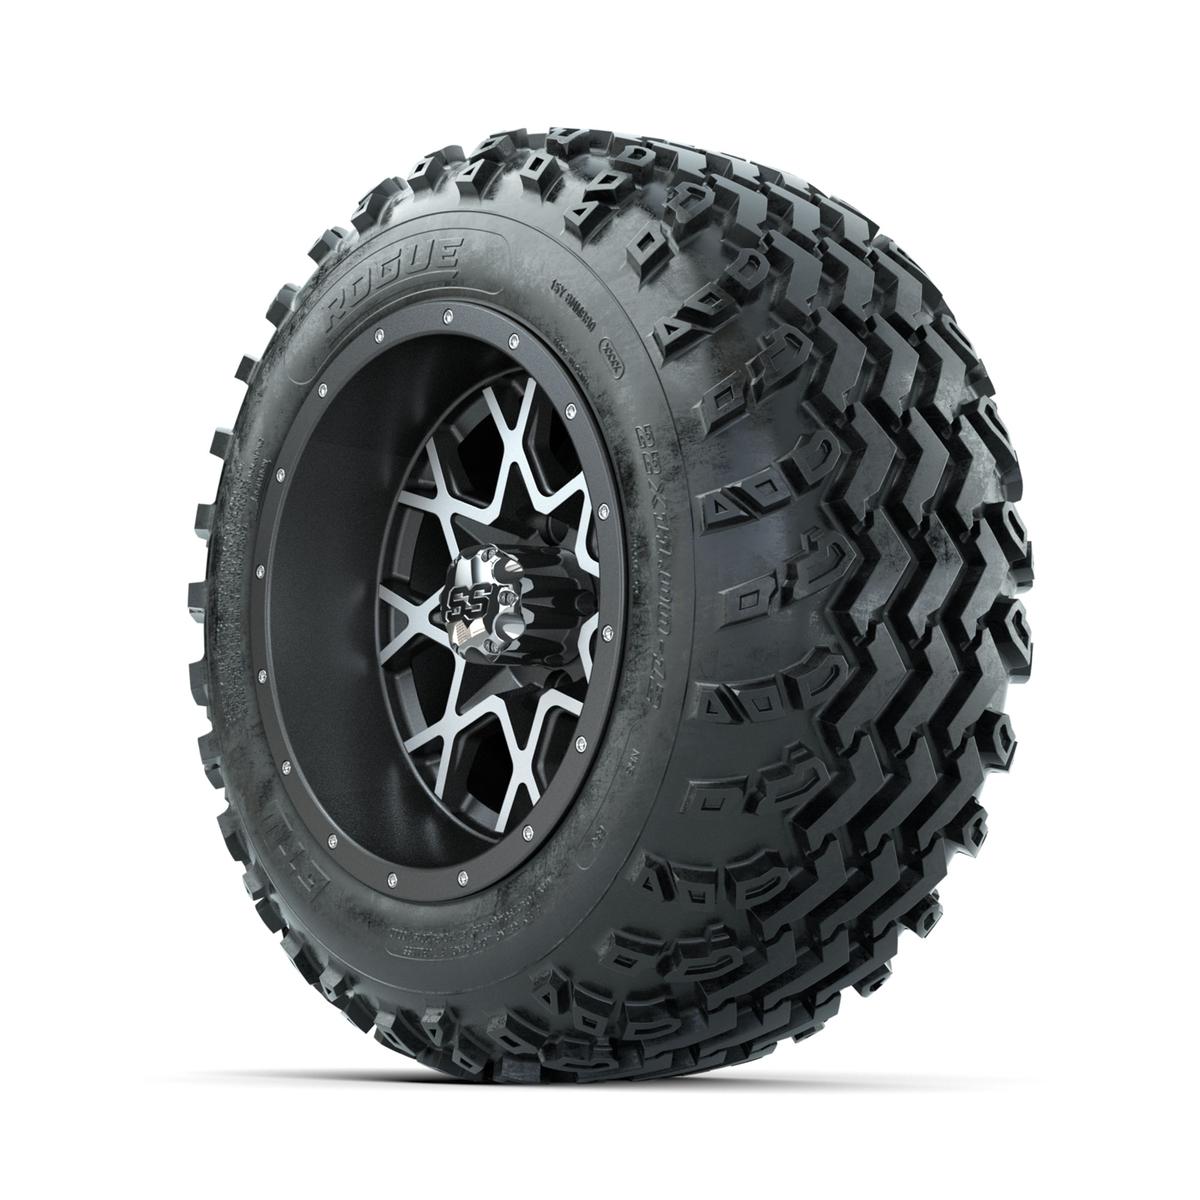 GTW Vortex Machined/Matte Grey 12 in Wheels with 22x11.00-12 Rogue All Terrain Tires – Full Set